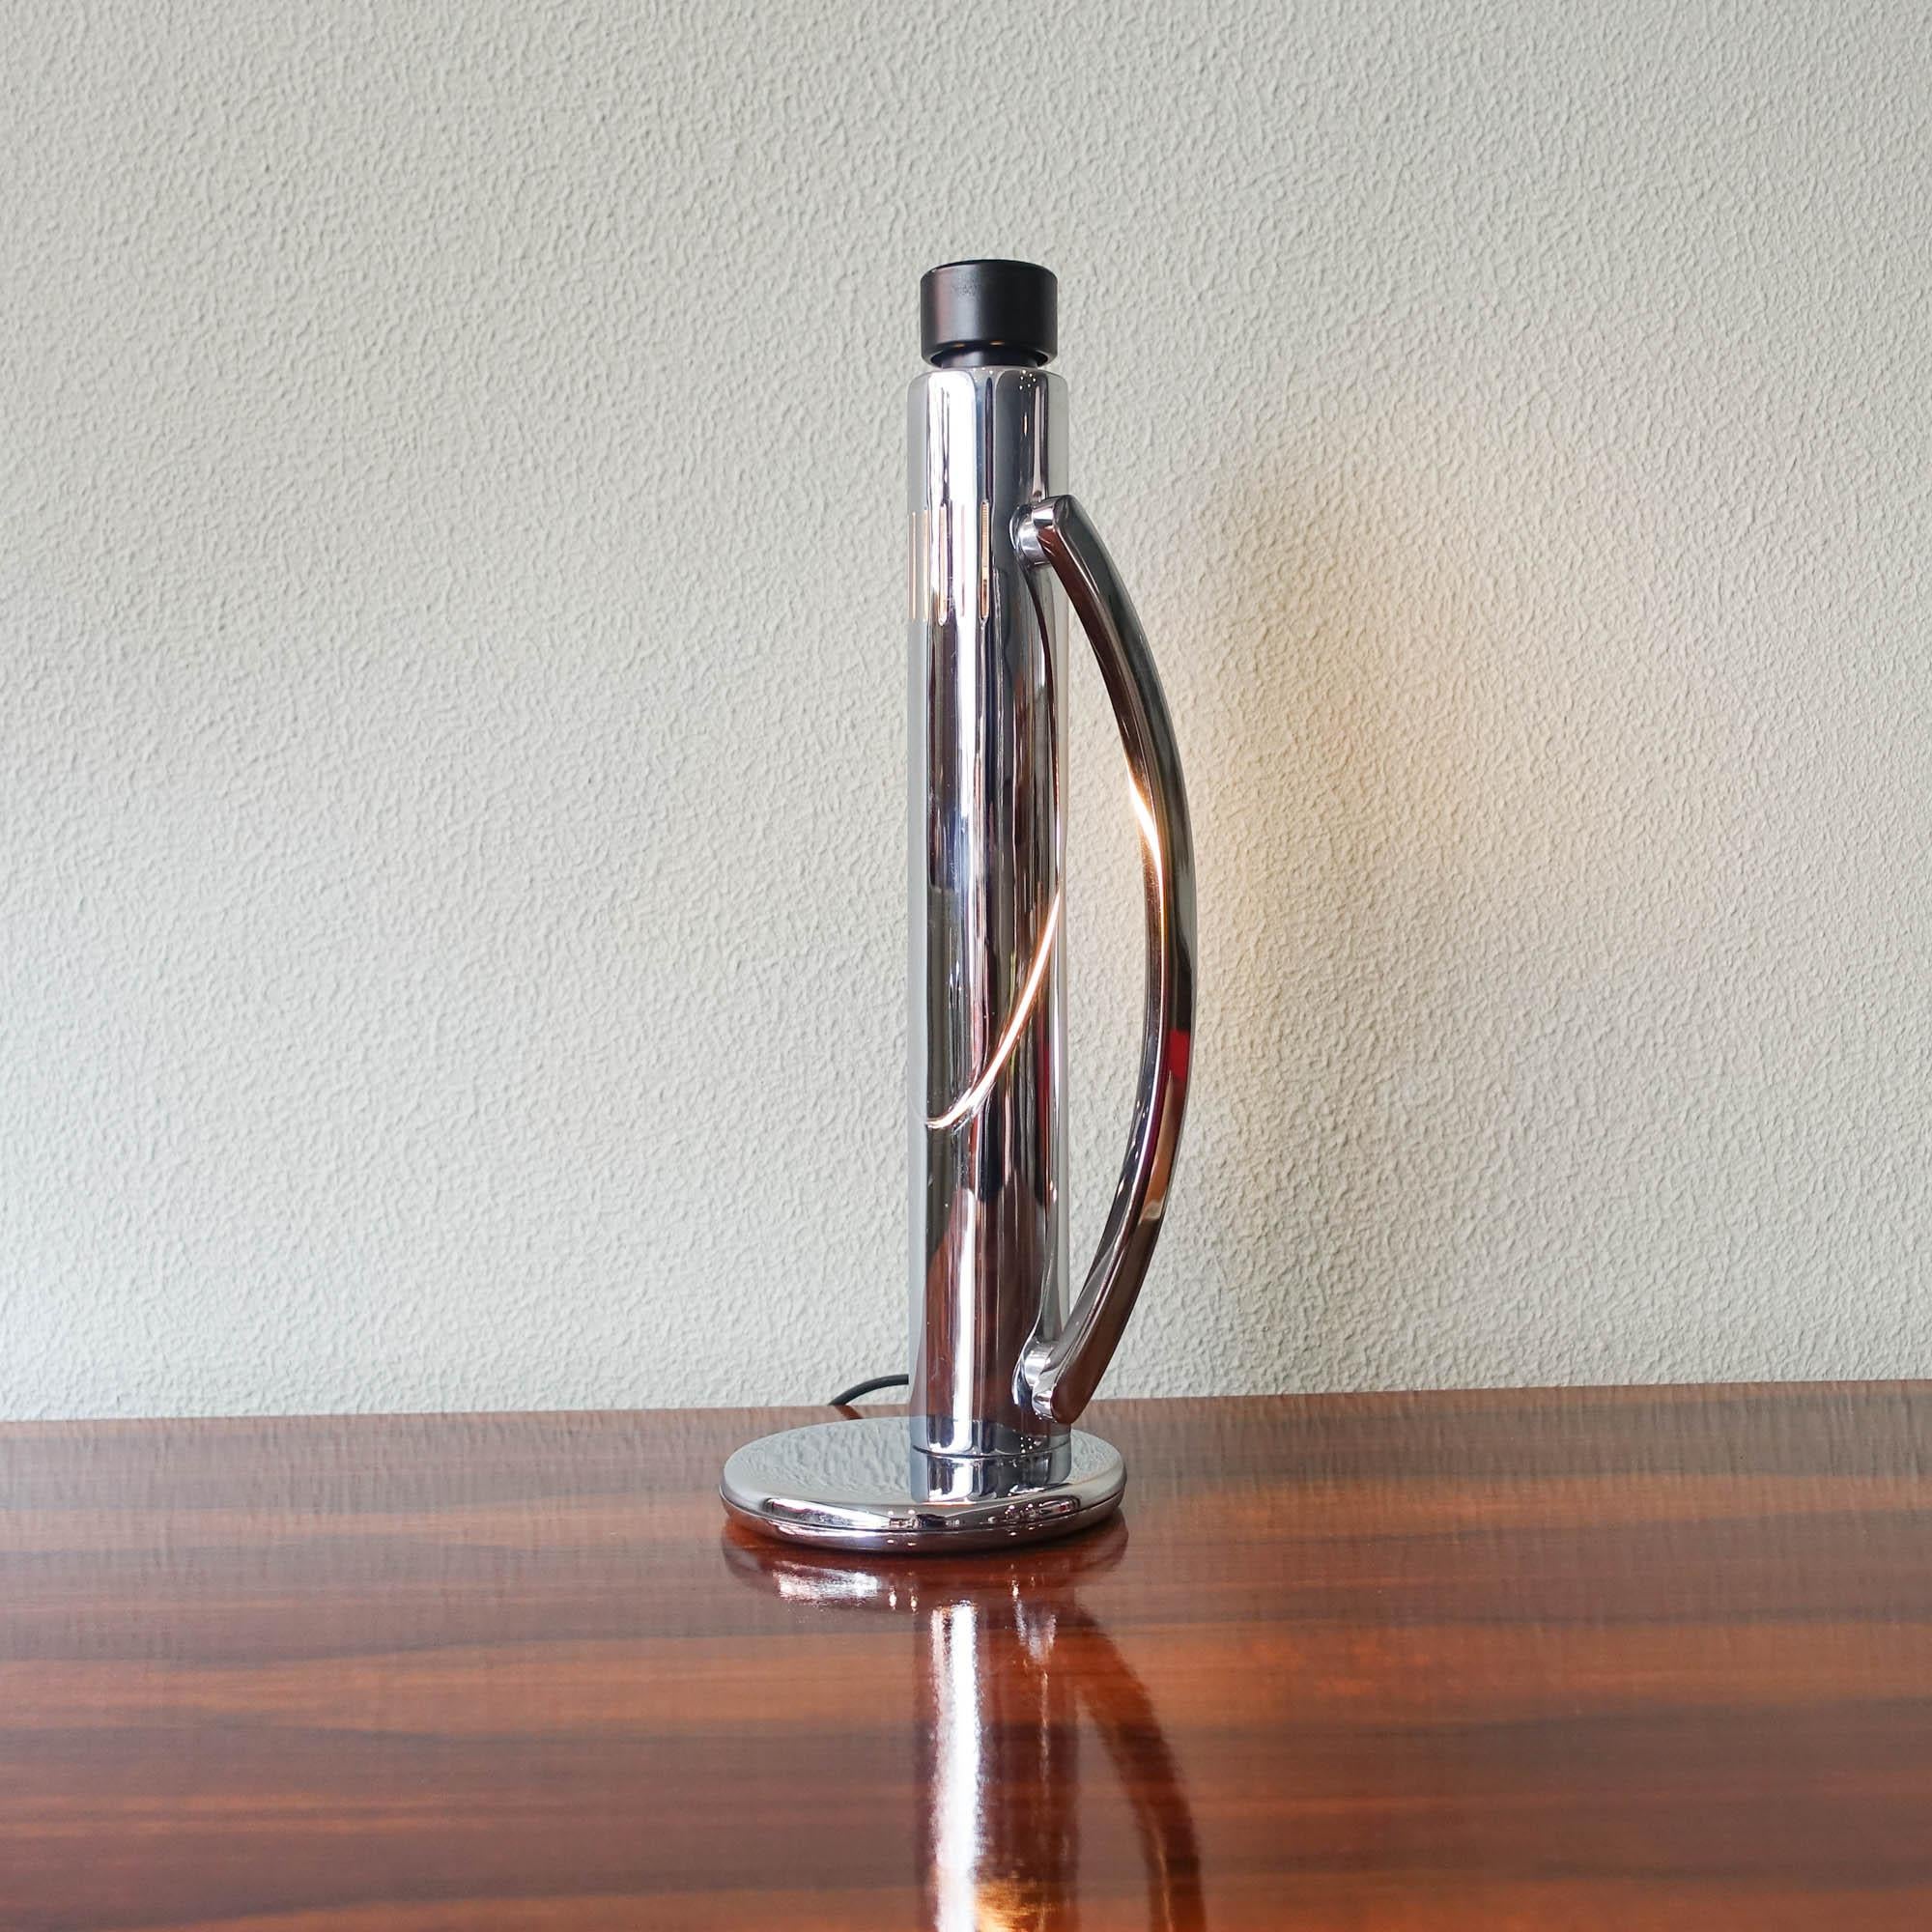 This Table Lamp, model Tharsis, was designed by Luis Perez de la Oliva and produced by Fase, in Spain, in 1973. It has a round chromed metal base (iron). 2 chrome cut tubes, painted off white inside. The lampshade part is perforated. Black round